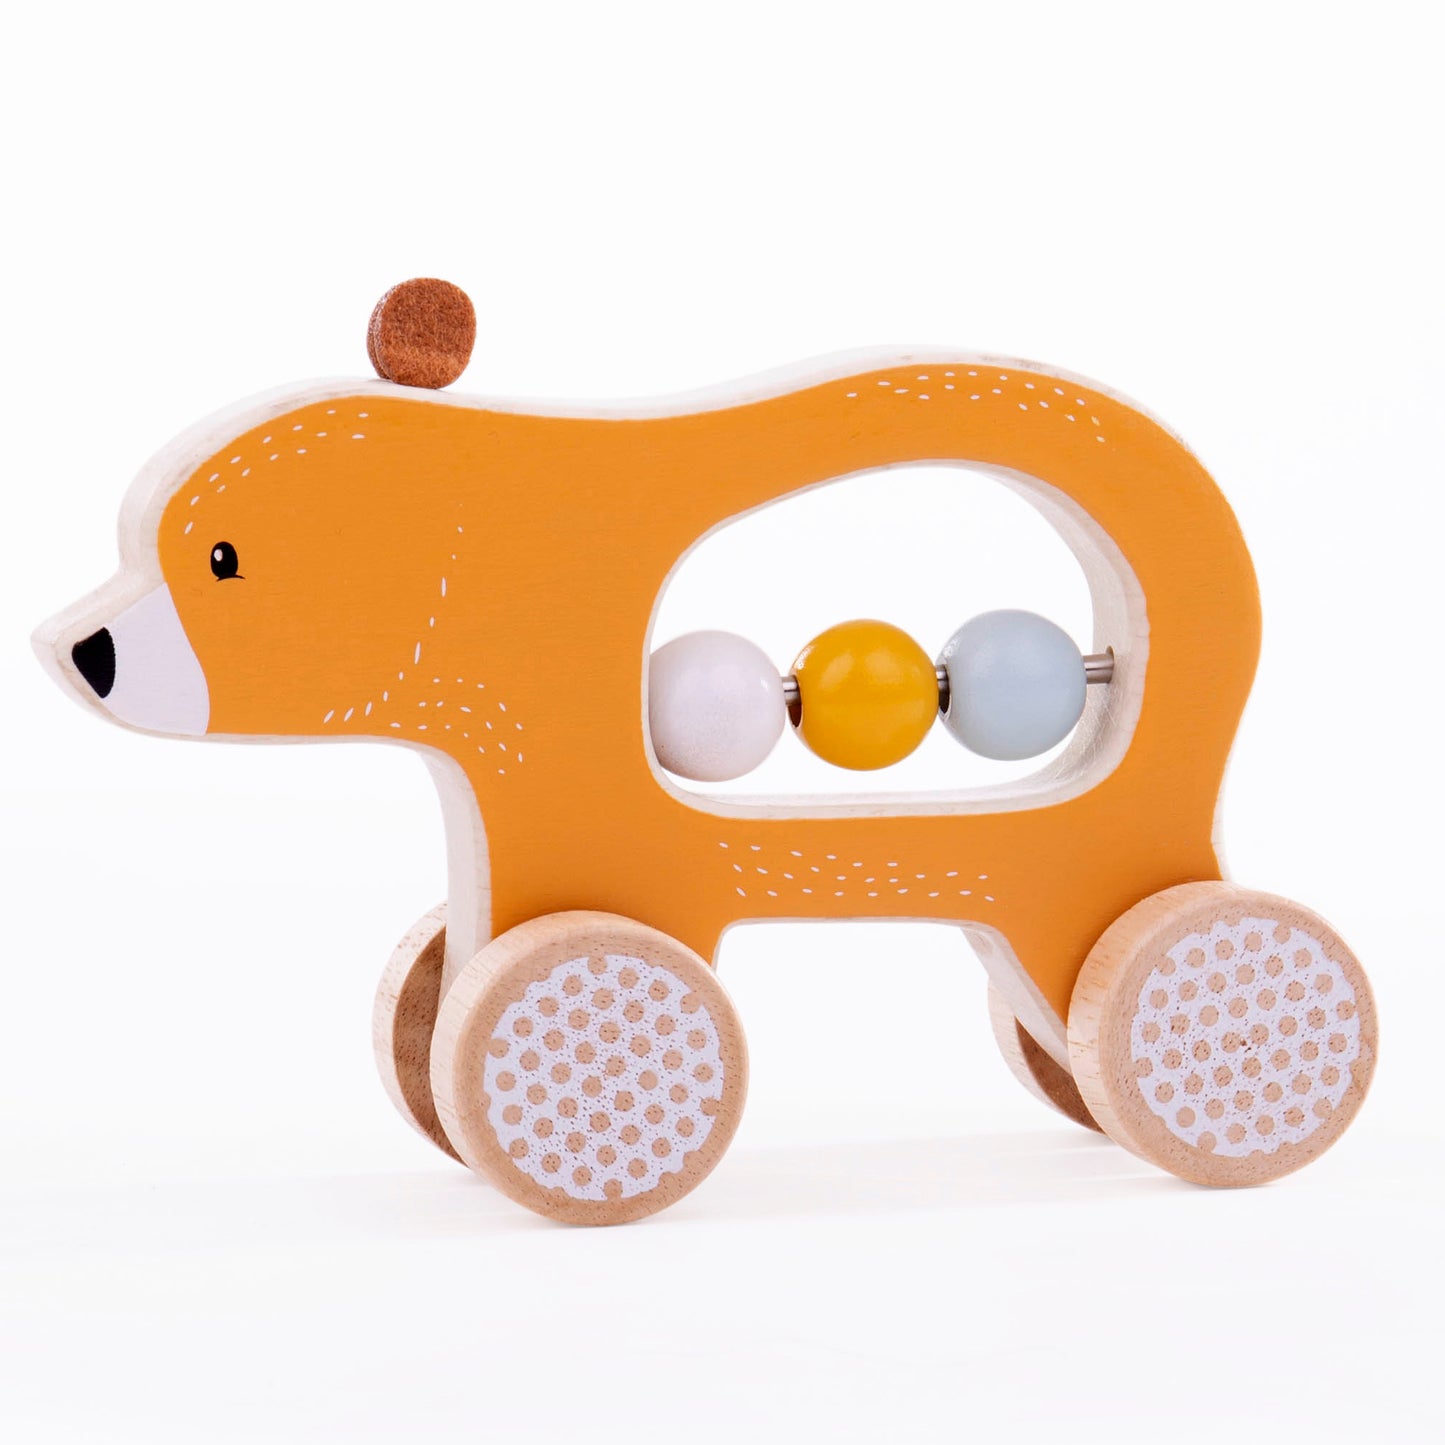 Bigjigs Toys Push Along Bear ‚Äì Safe and Engaging Wooden Toy for Infants